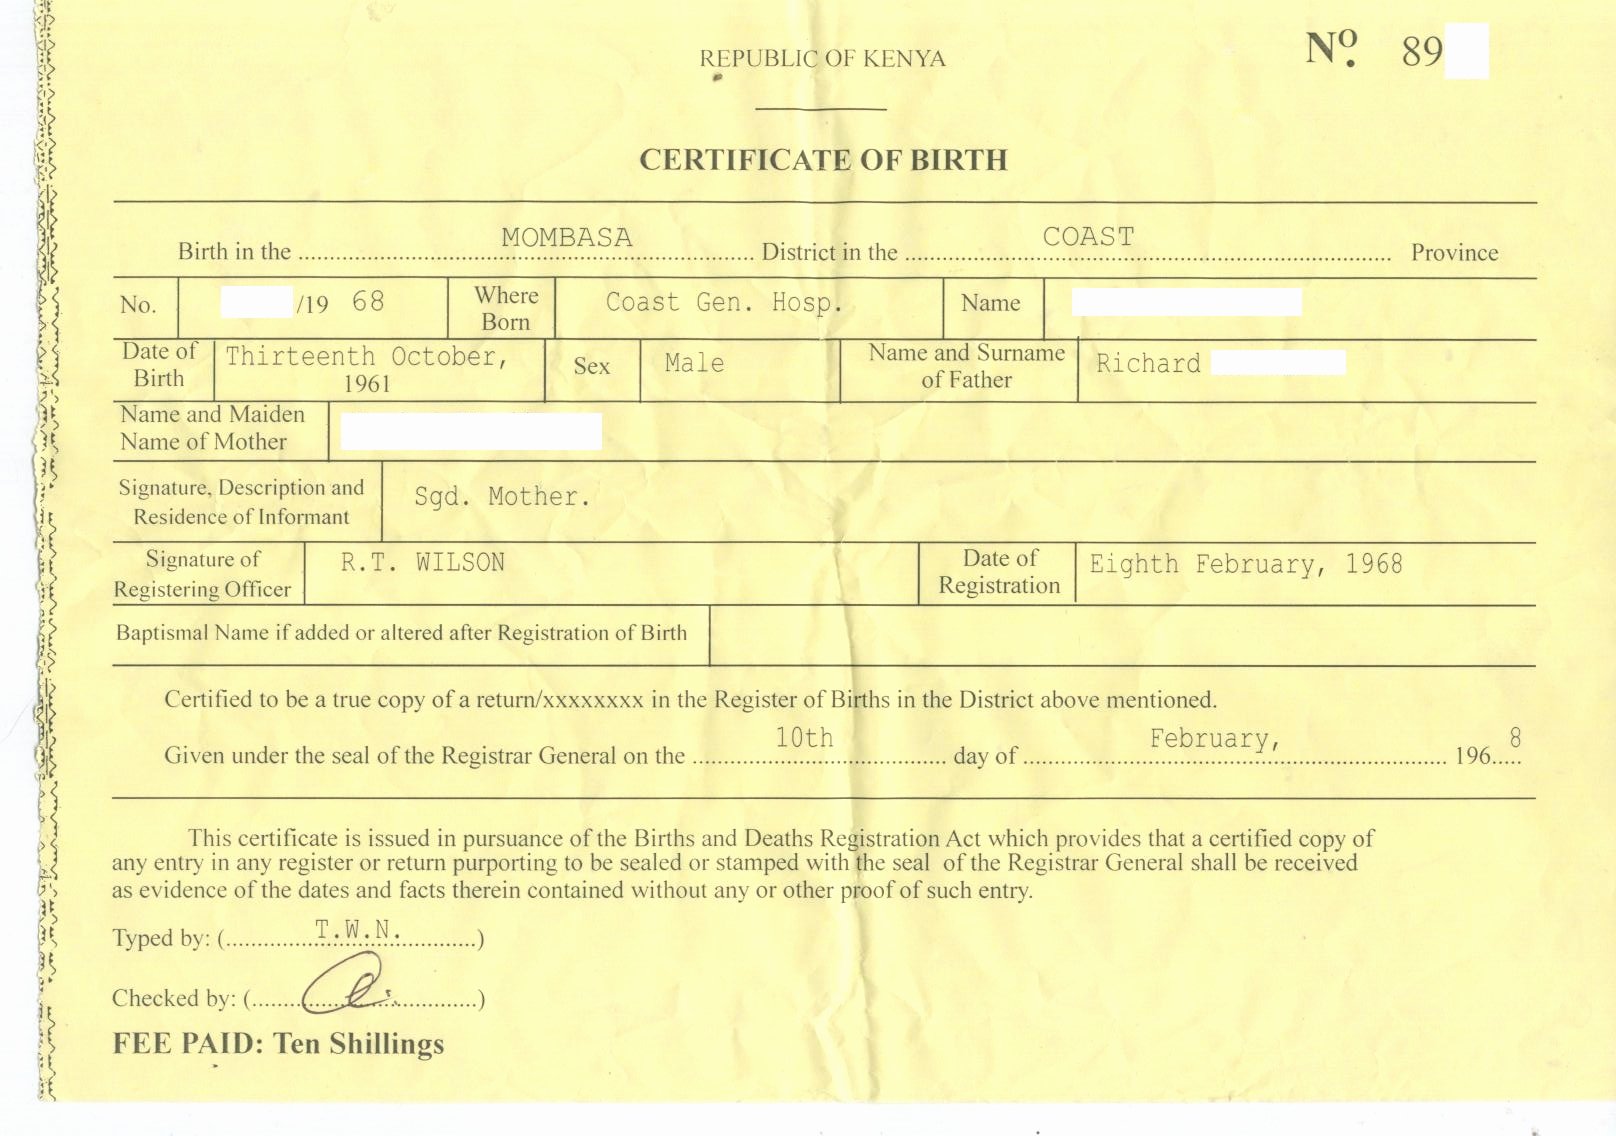 Real Birth Certificate Template Lovely Dr Conspiracy’s First Fake Kenyan Birth Certificate